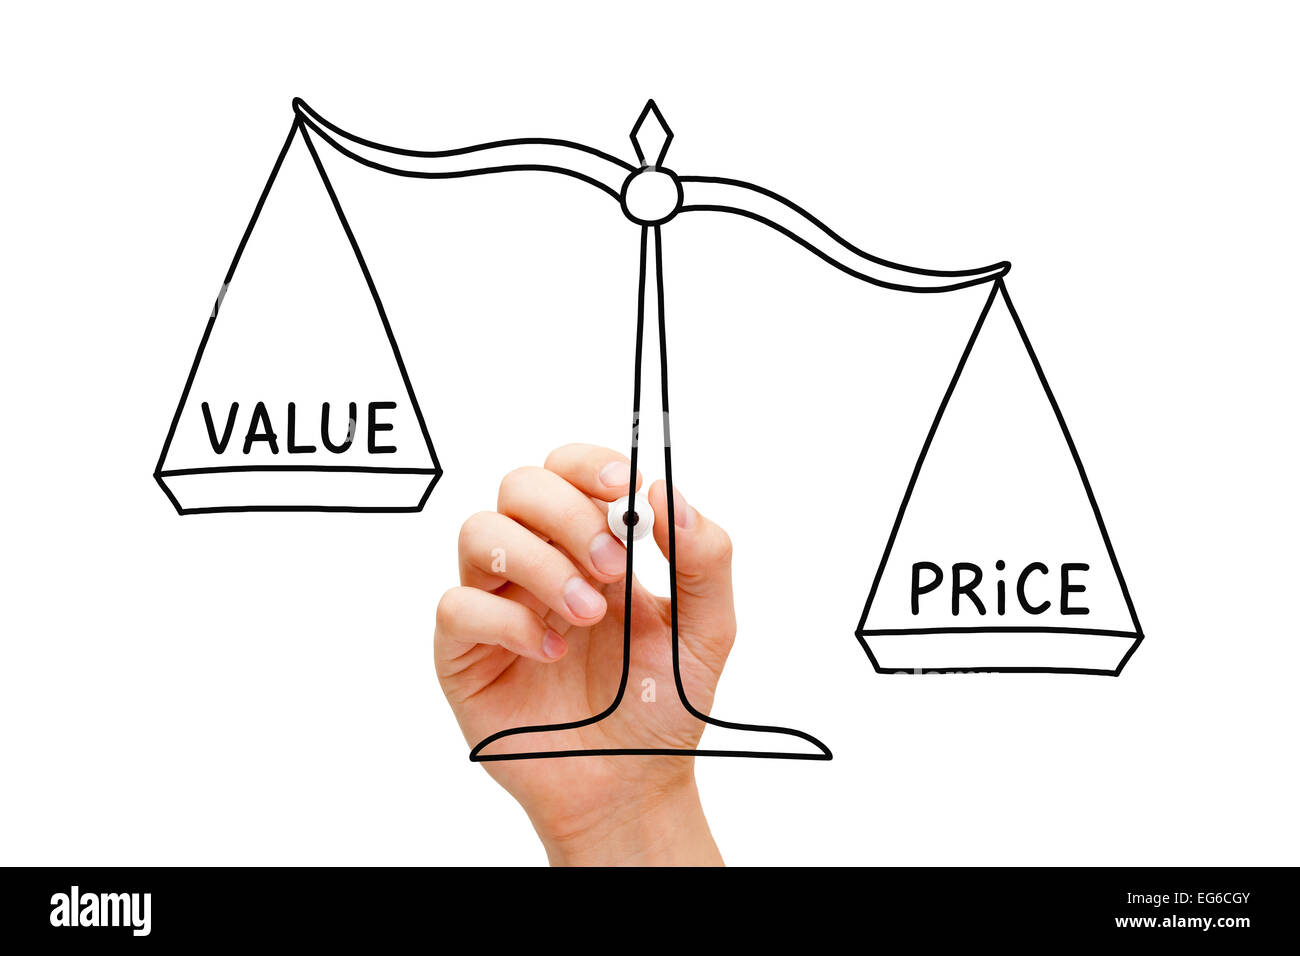 Hand drawing Price Value scale concept with black marker on transparent wipe board isolated on white. Stock Photo